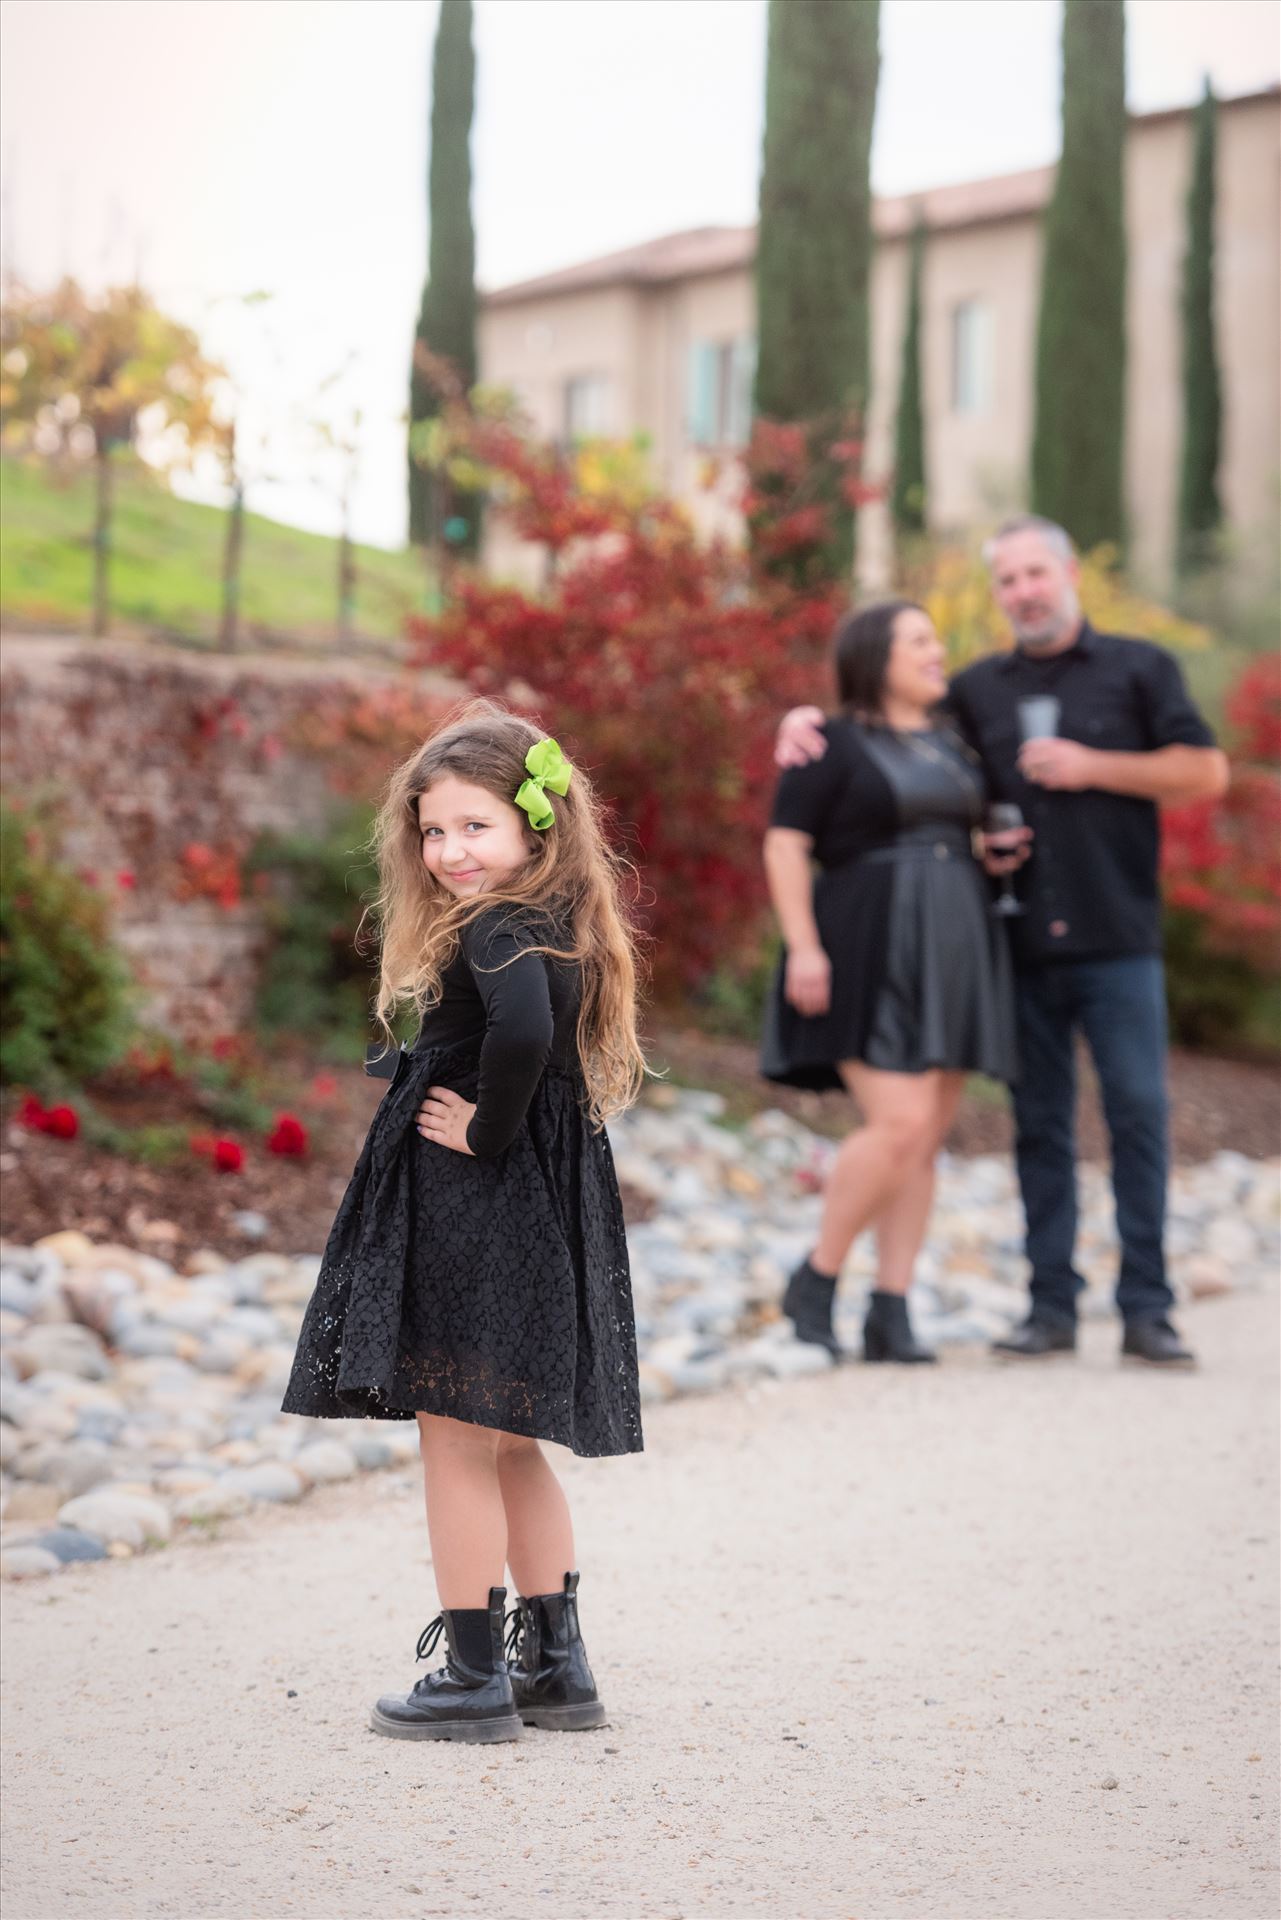 Final-8219.JPG - Sarah Williams of Mirror's Edge Photography, a San Luis Obispo Wedding, Engagement and Portrait Photographer, captures the Foster Family Fall Session at the gorgeous Allegretto Resort and Vineyards in Paso Robles, California. Littles up front by Sarah Williams